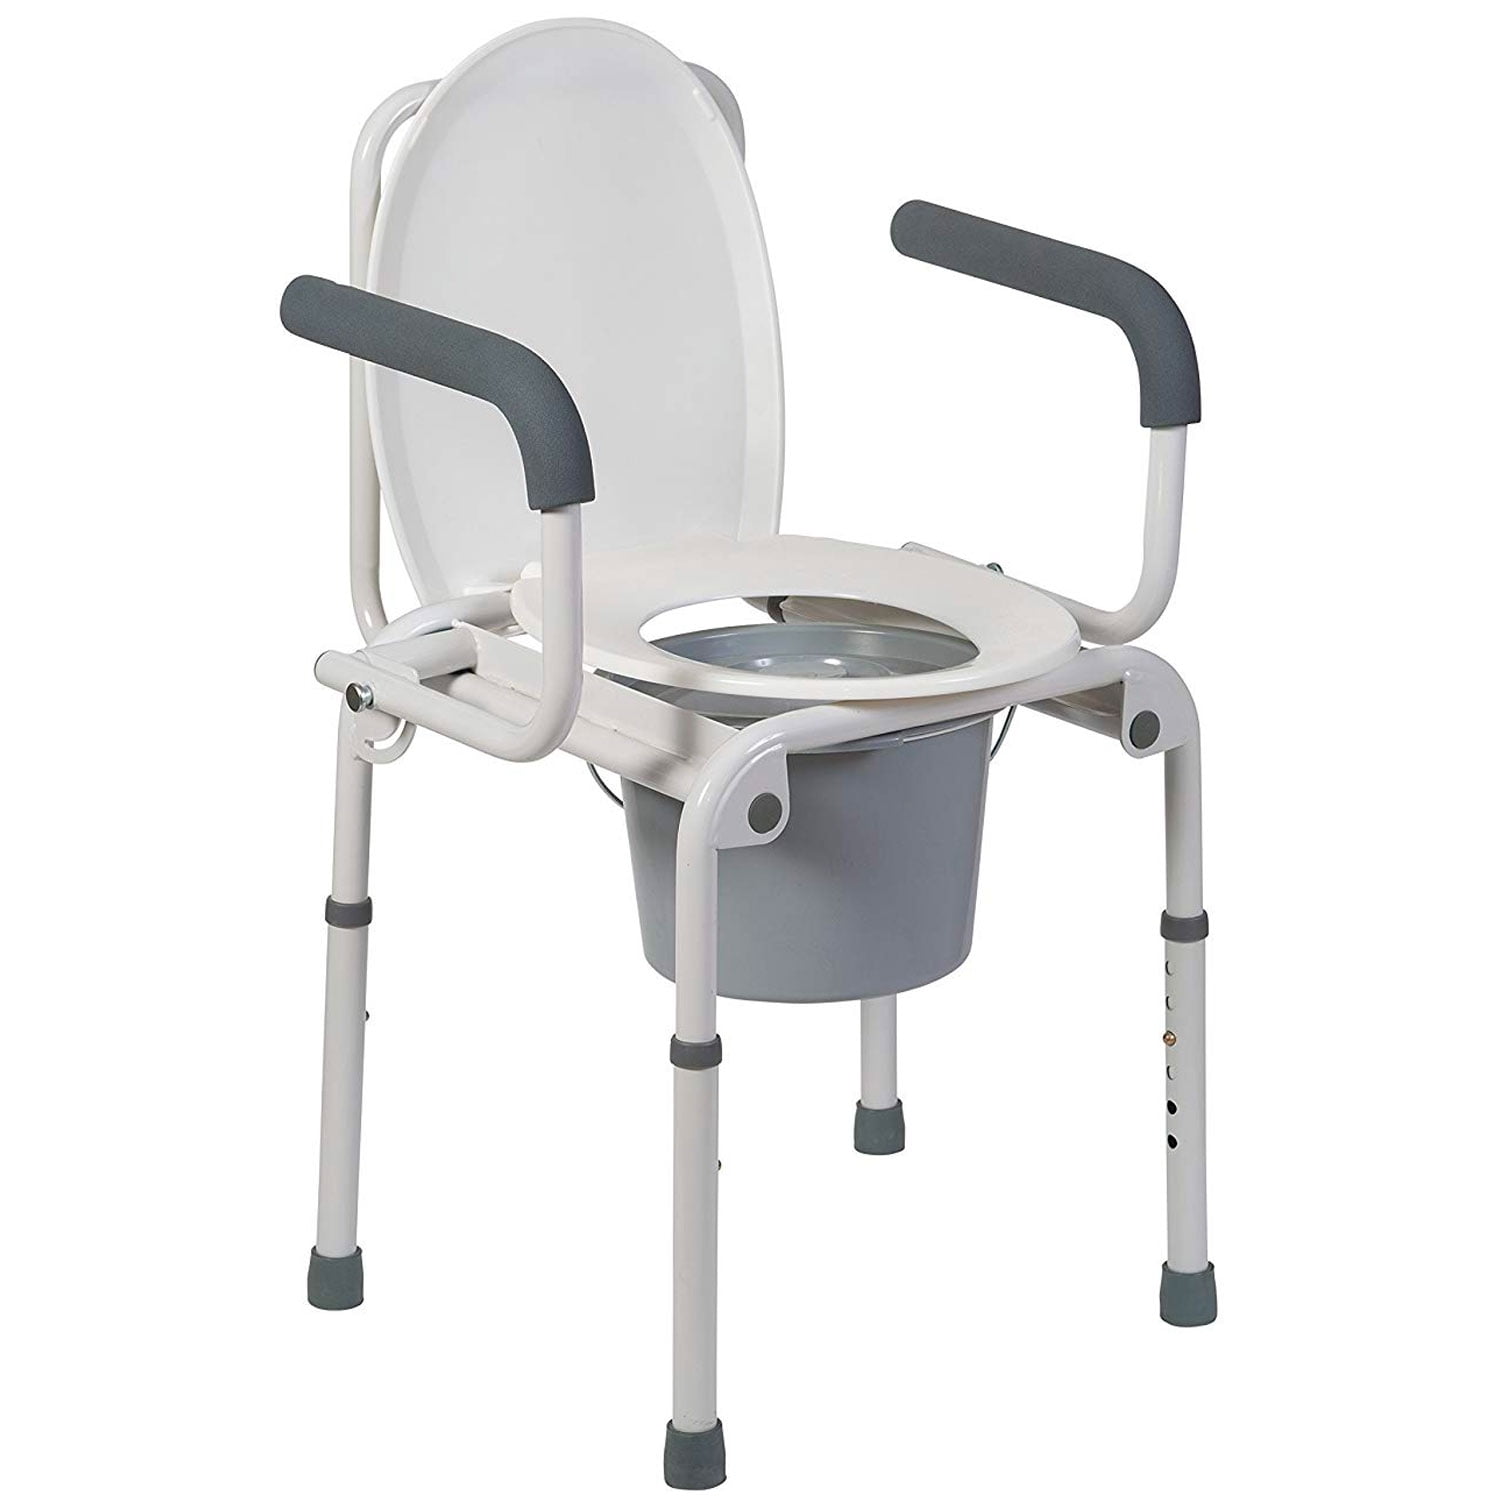 Commode Chair Folding Toilet Stainless Steel Toilet Pregnant Woman /Old Man/Disabled Person Potty chair